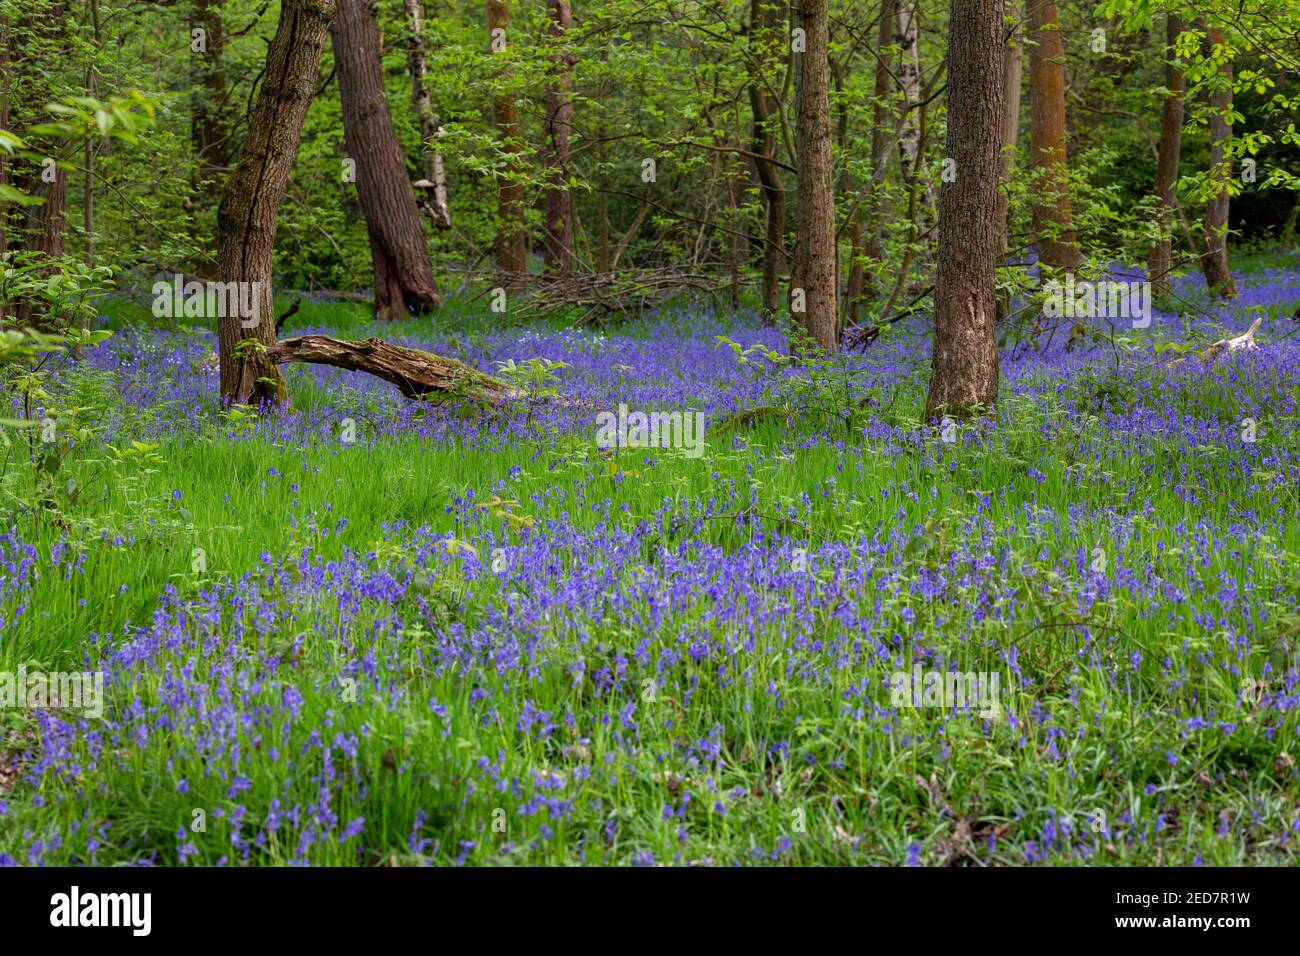 Carpets of common bluebells flowers in an ancient woodland in England, UK. Spring is coming. Stock Photo